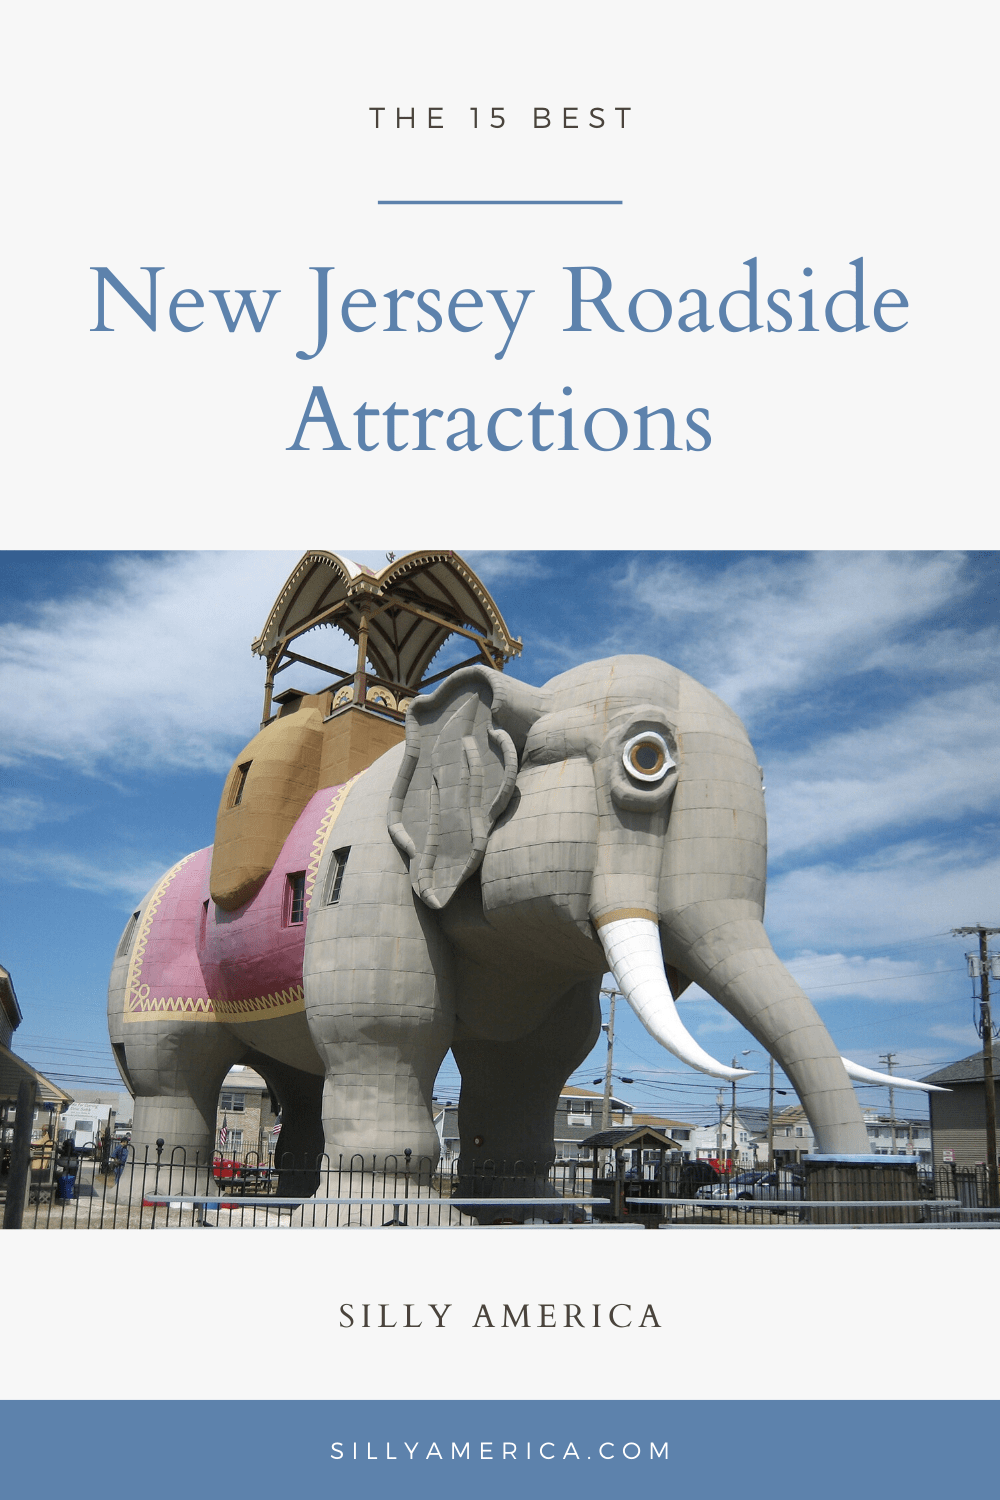 The best New Jersey roadside attractions to visit on a New Jersey road trip or weekend getaway. Add these roadside oddities to your travel bucket list or road trip itinerary and visit them on an Atlantic City vacation or trip to the Jersey Shore. #NewJerseyRoadsideAttractions #NewJerseyRoadsideAttraction #RoadsideAttractions #RoadsideAttraction #RoadTrip #NewJerseyRoadTrip #NewJerseyRoadTripMap #NewJerseyRoadTripItinerary #WeirdRoadsideAttractions